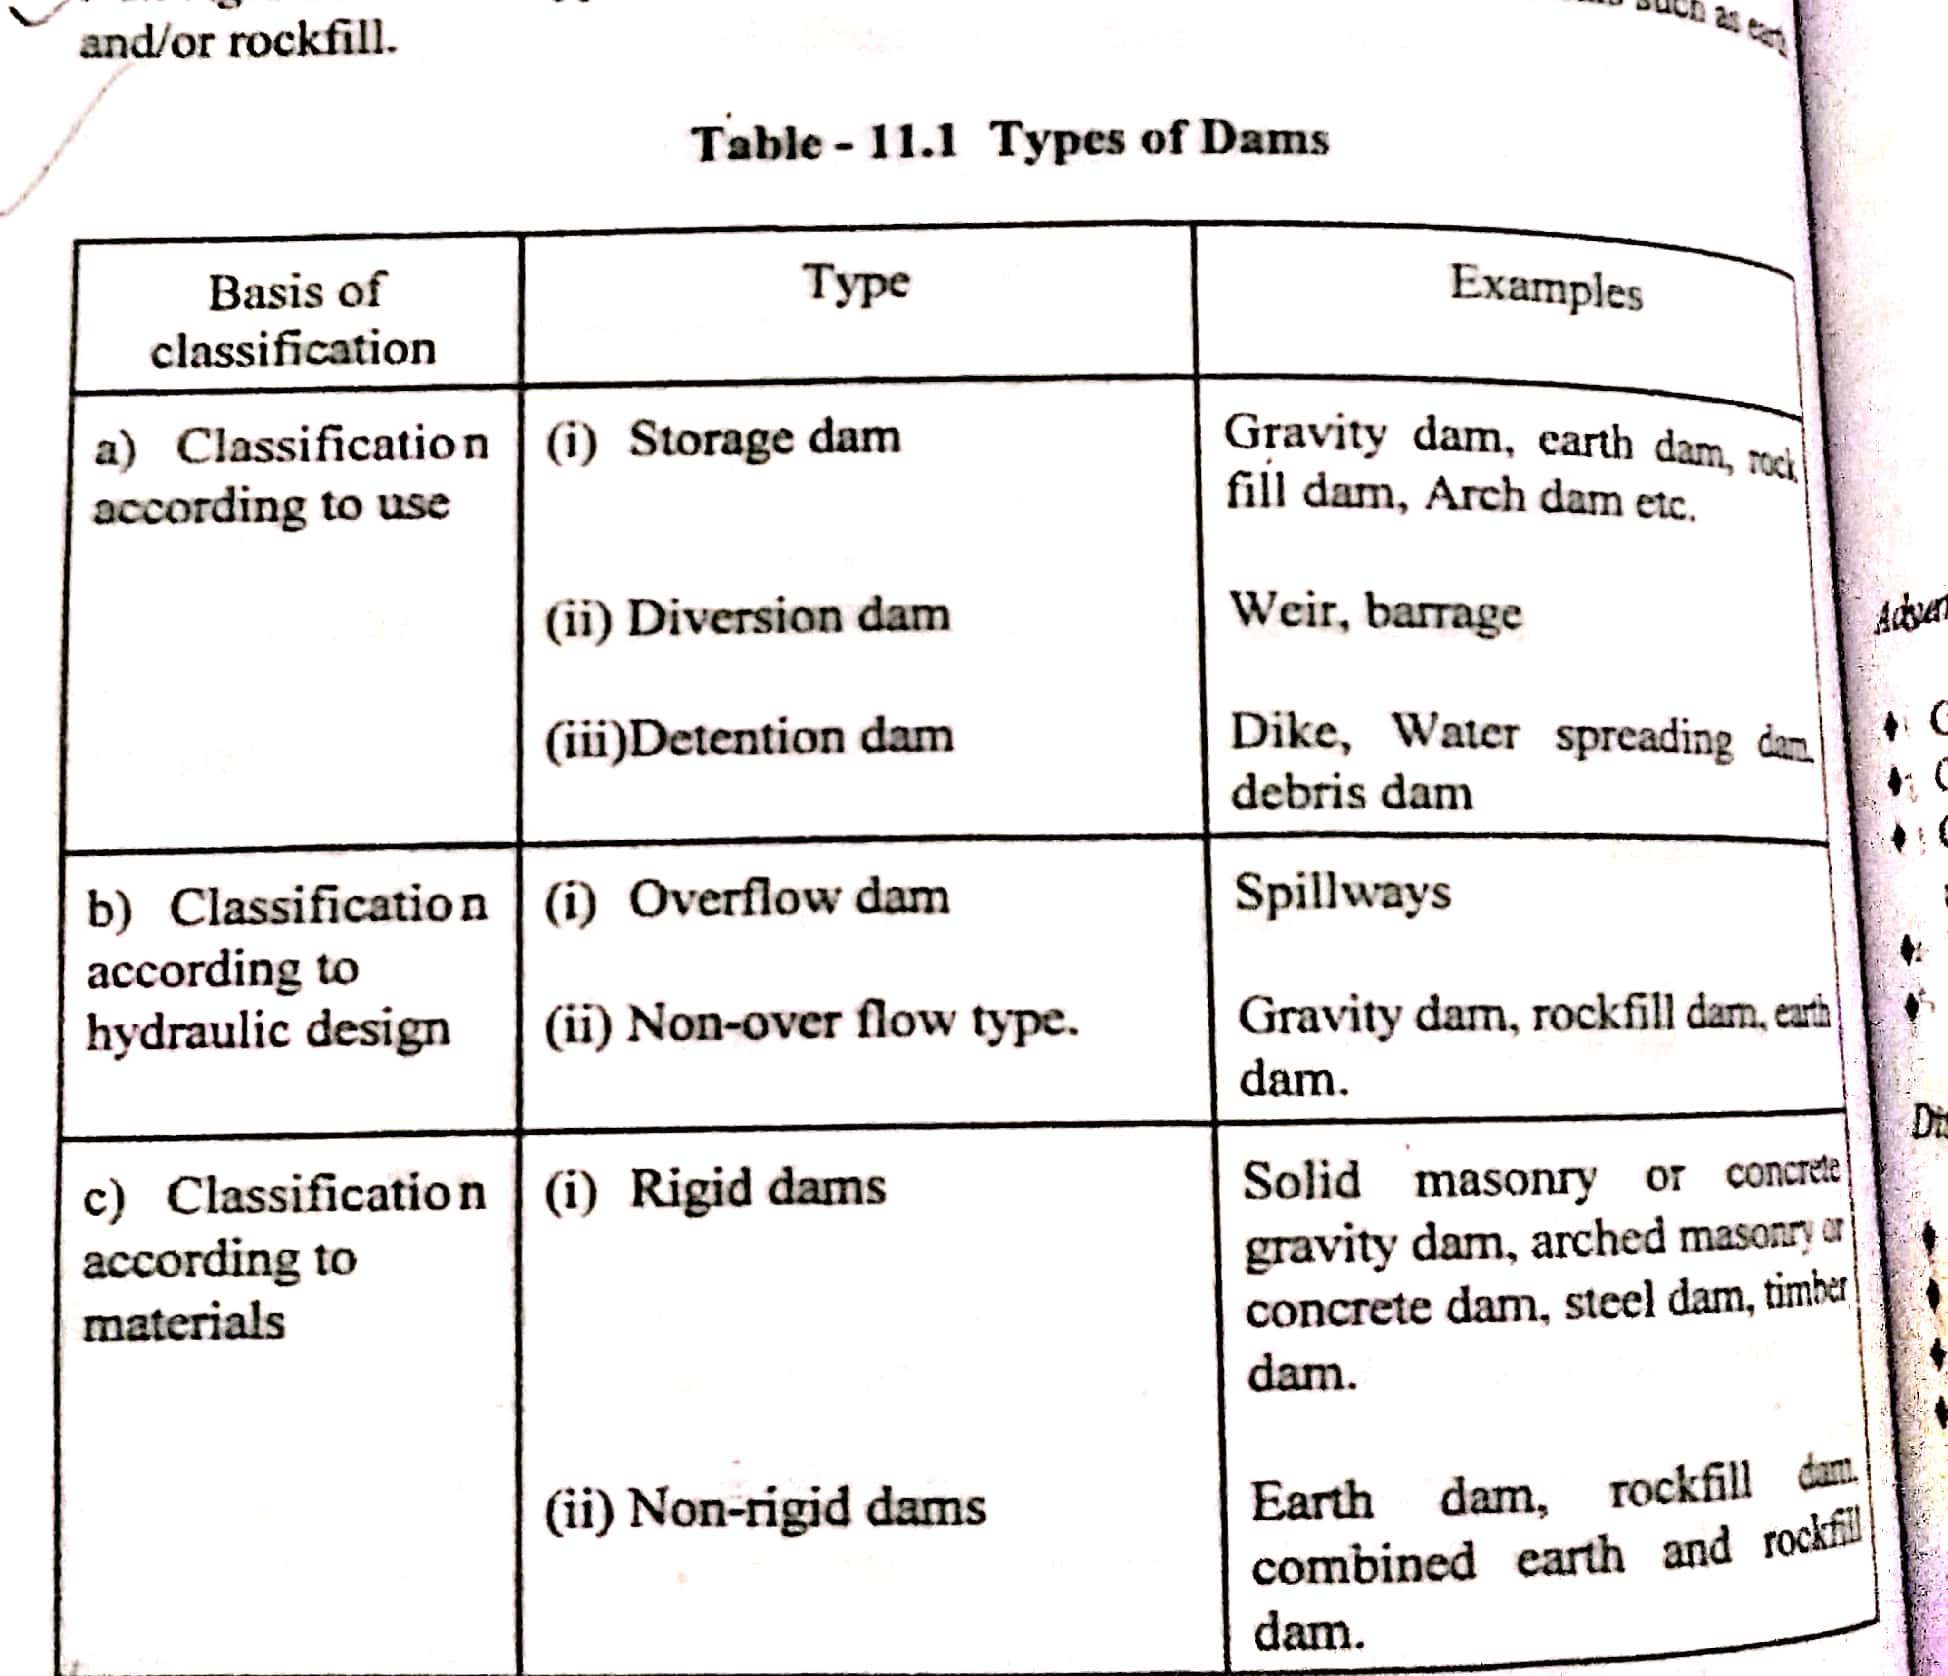 Type of Dams and their properties -New Doc 2019-11-30 20.41.41_74.jpg